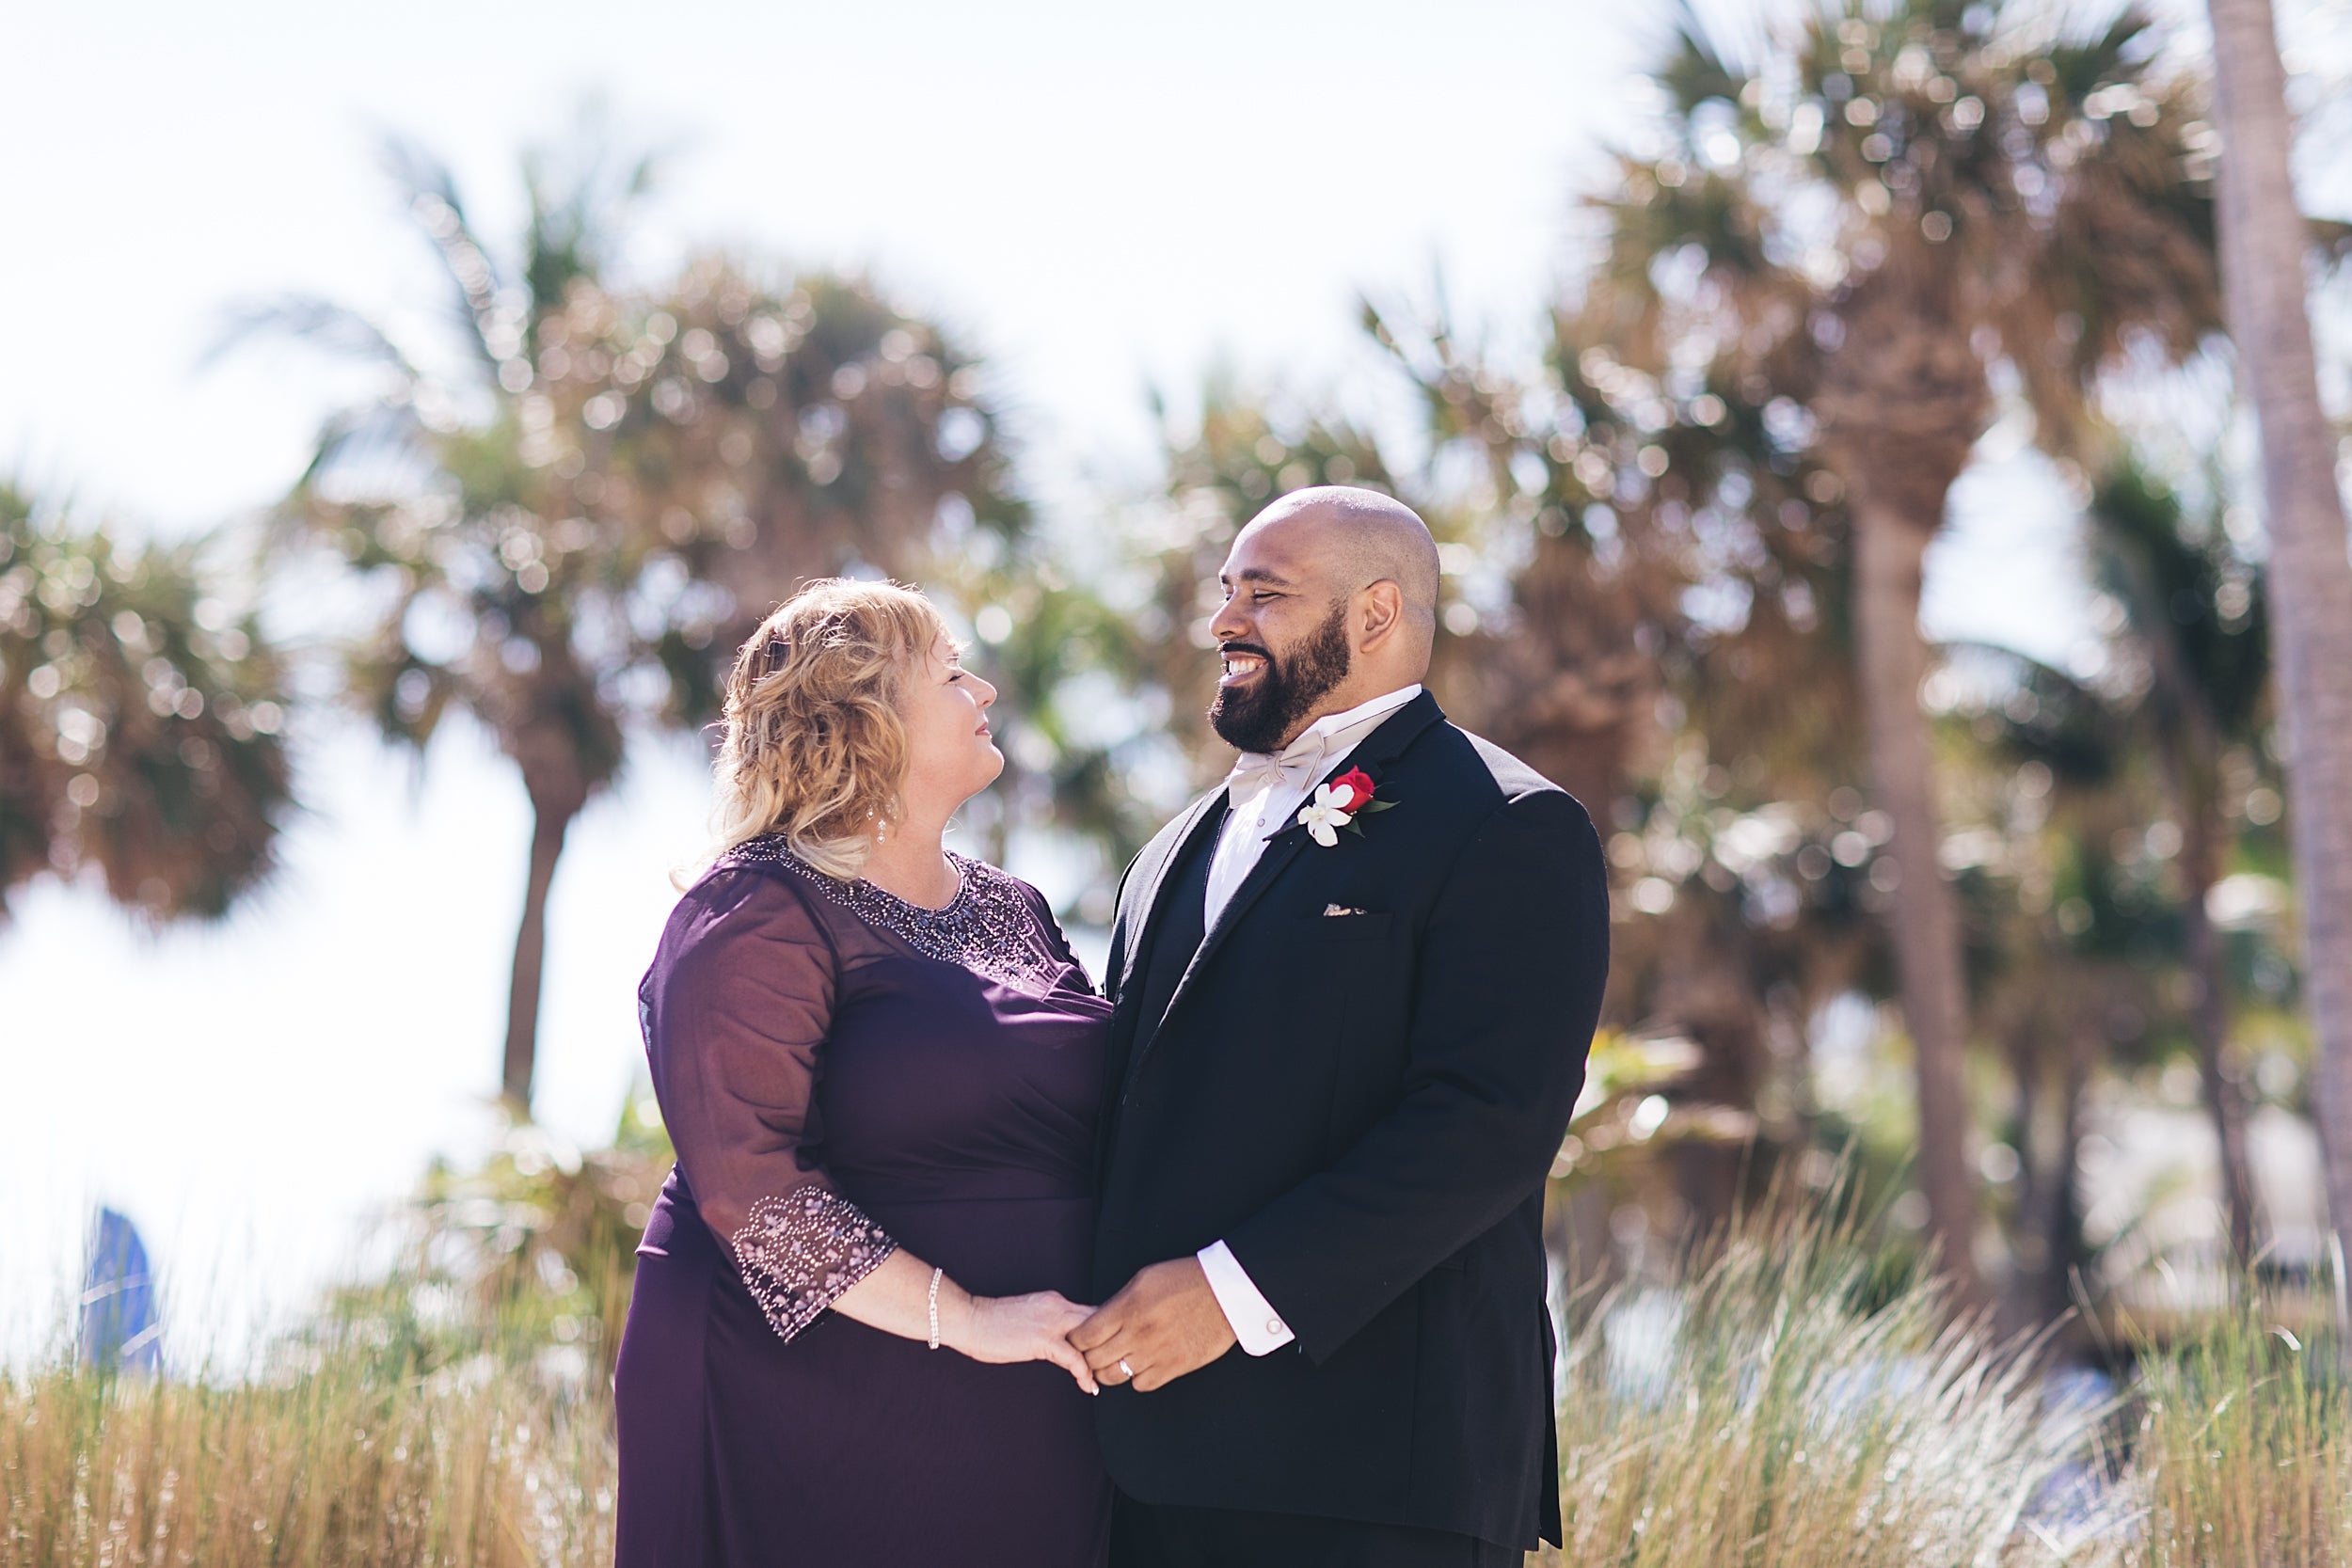 Bridal Bliss: Kevin And Talisa's Florida Wedding Was So Full Of Love
